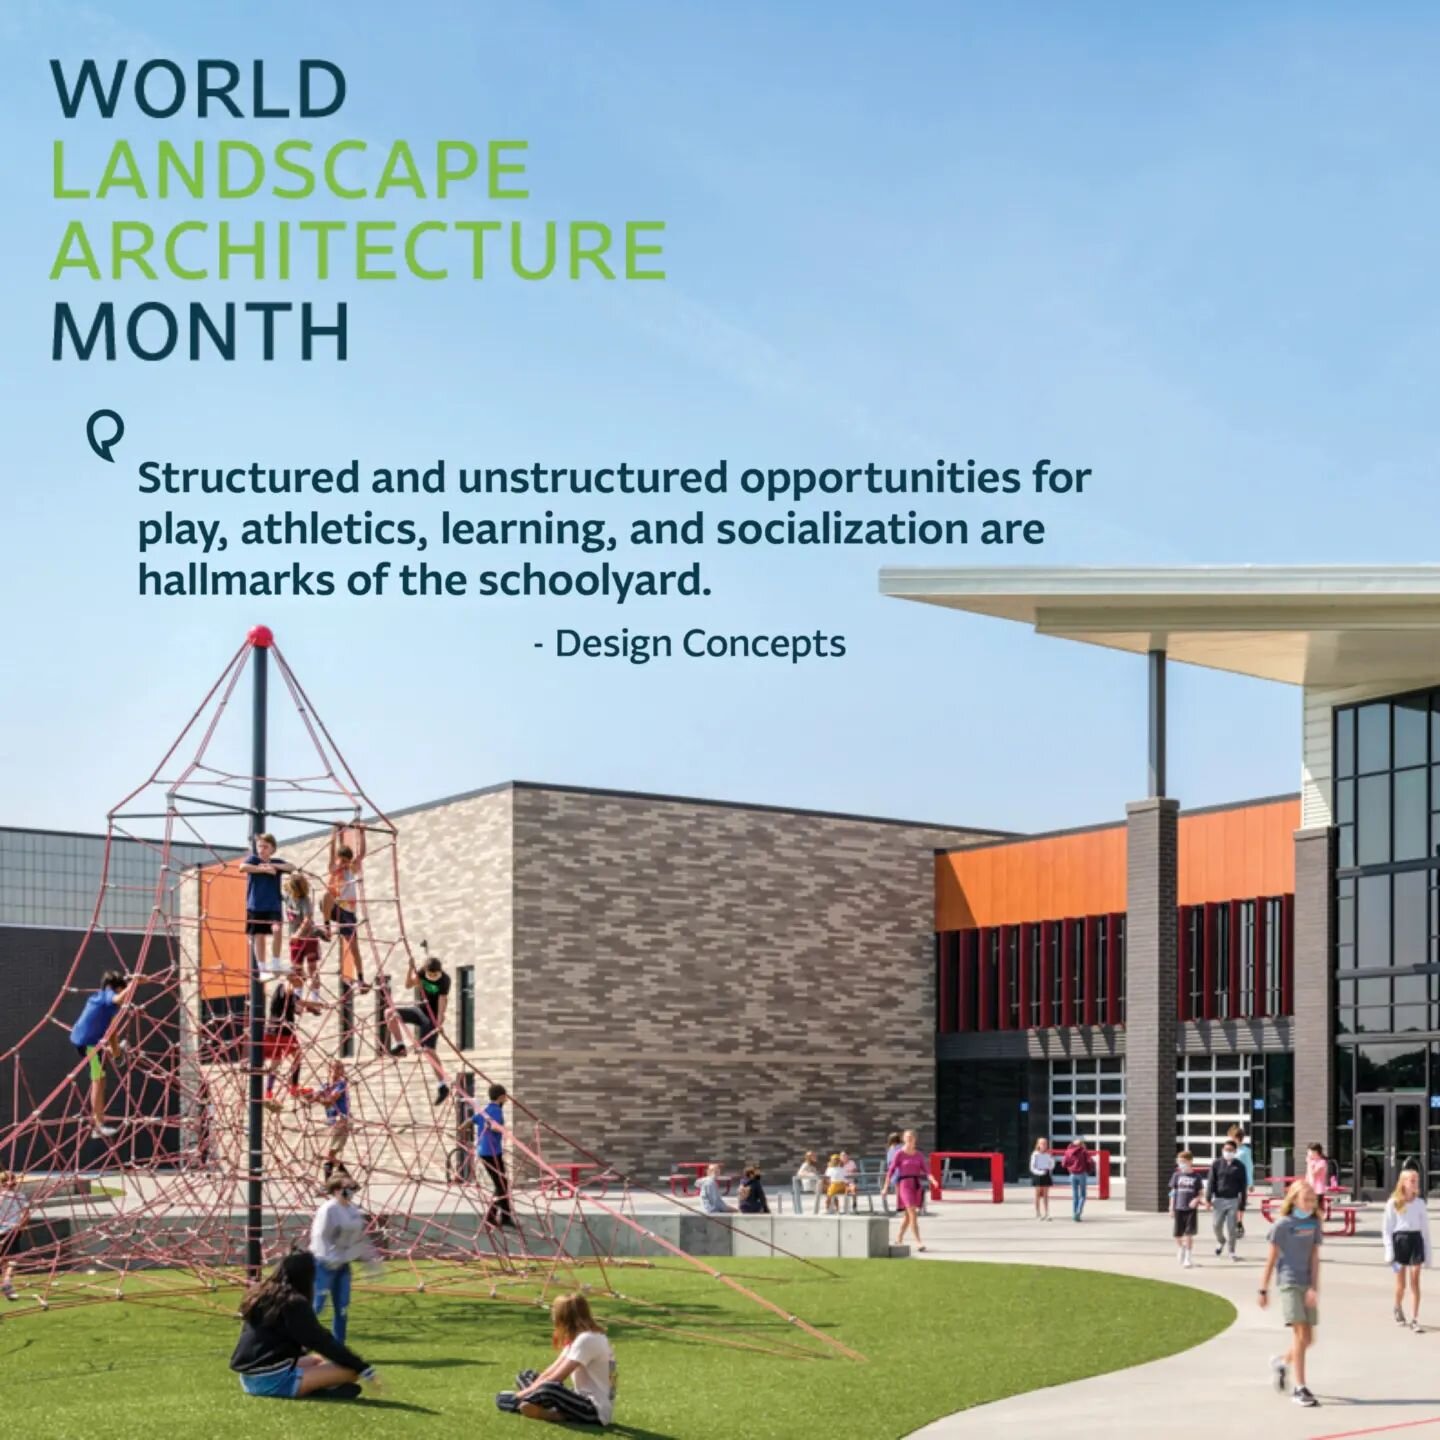 World Landscape Architecture Month helps ground us in gratitude for the role we play in shaping the future generations imagination through design.
.
.
.
#wlam2023 #worldlandscapearchitecturemonth  #landscapearchitecture #educationdesign